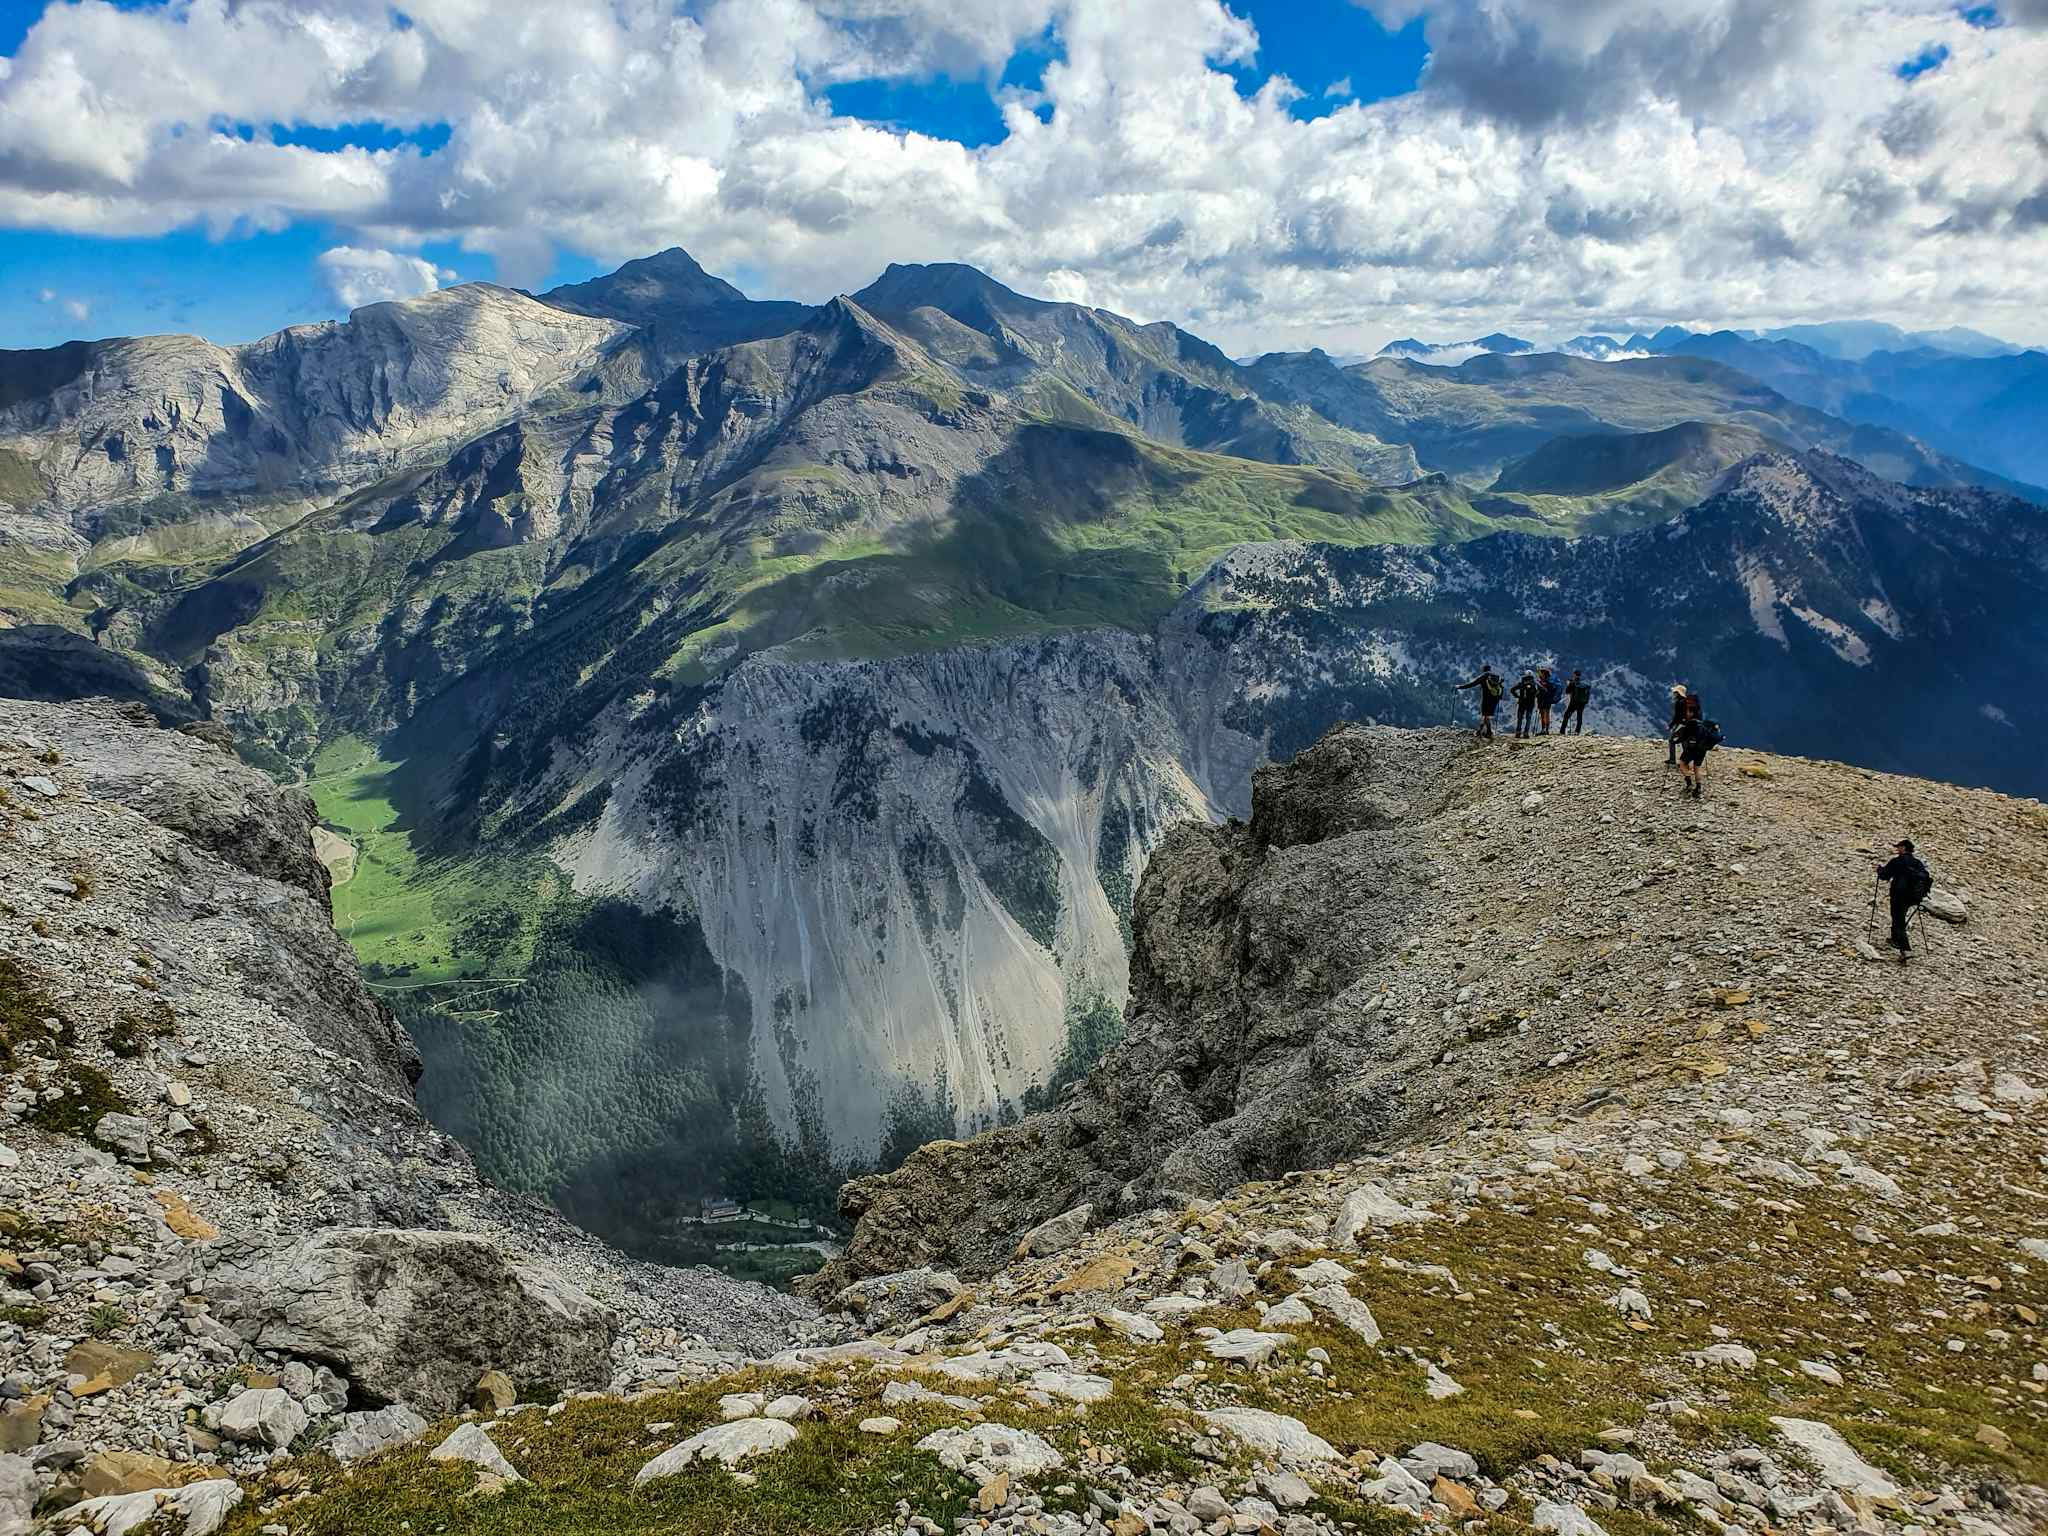 Trekkers in the Pyrenees, Spain. Photo: Host/Rumbo a Picos